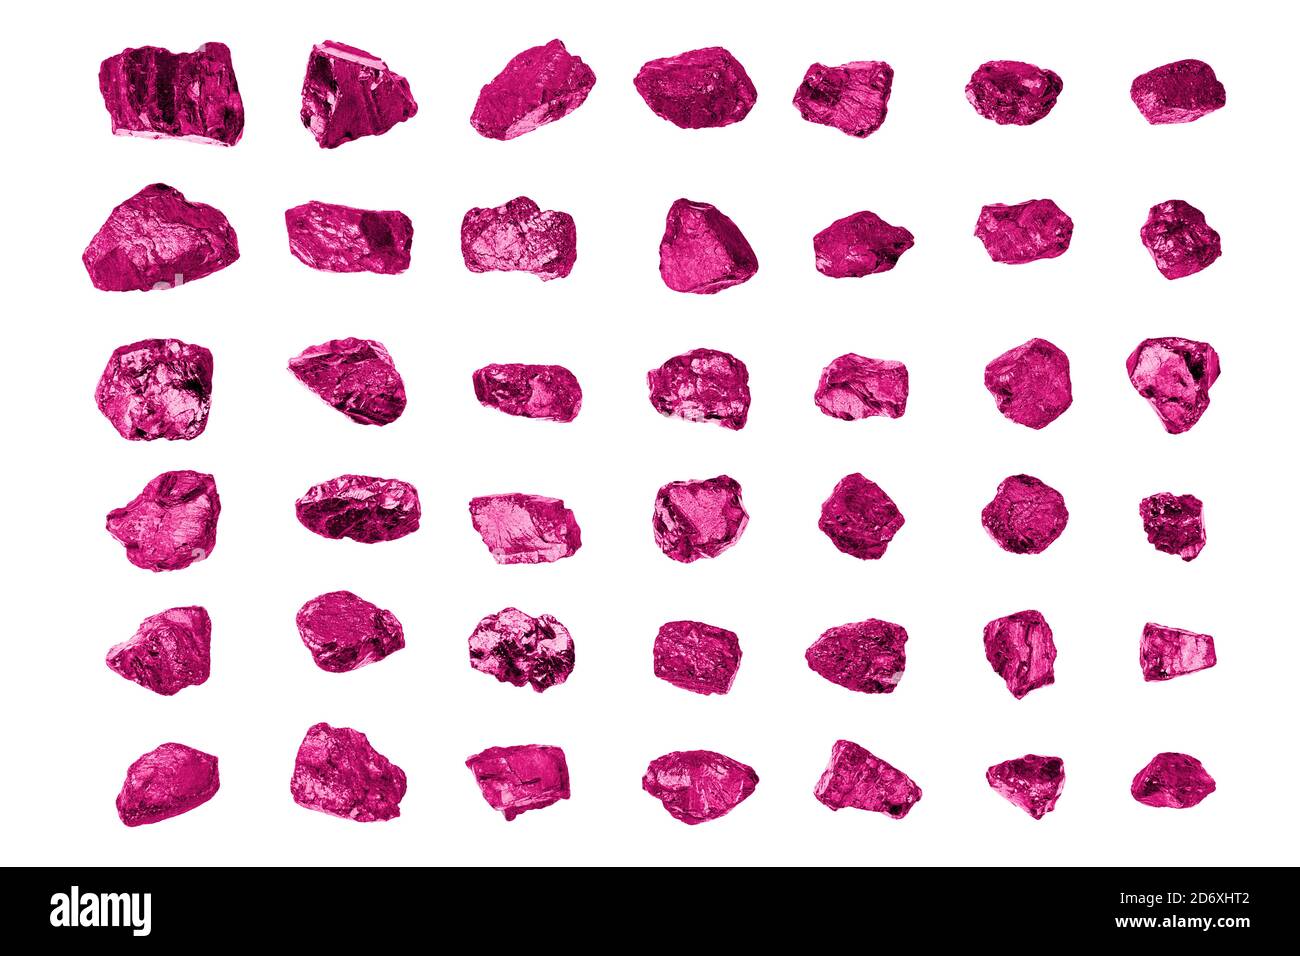 Pink gem stones white background isolated close up, raw gemstones, rocks, nuggets, mineral samples, amethyst, sapphire, topaz, spinel, tourmaline Stock Photo